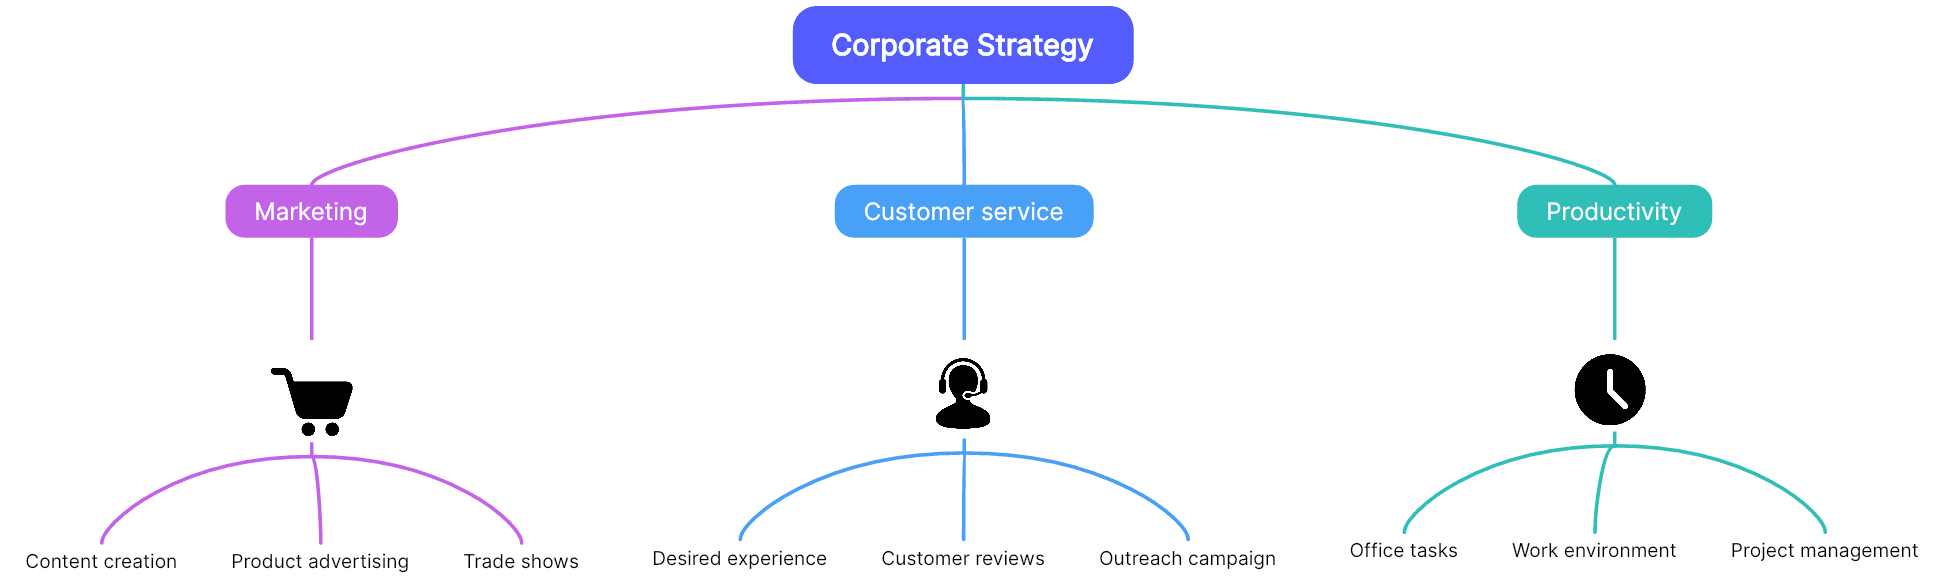 17 Corporate Strategy Mind Map